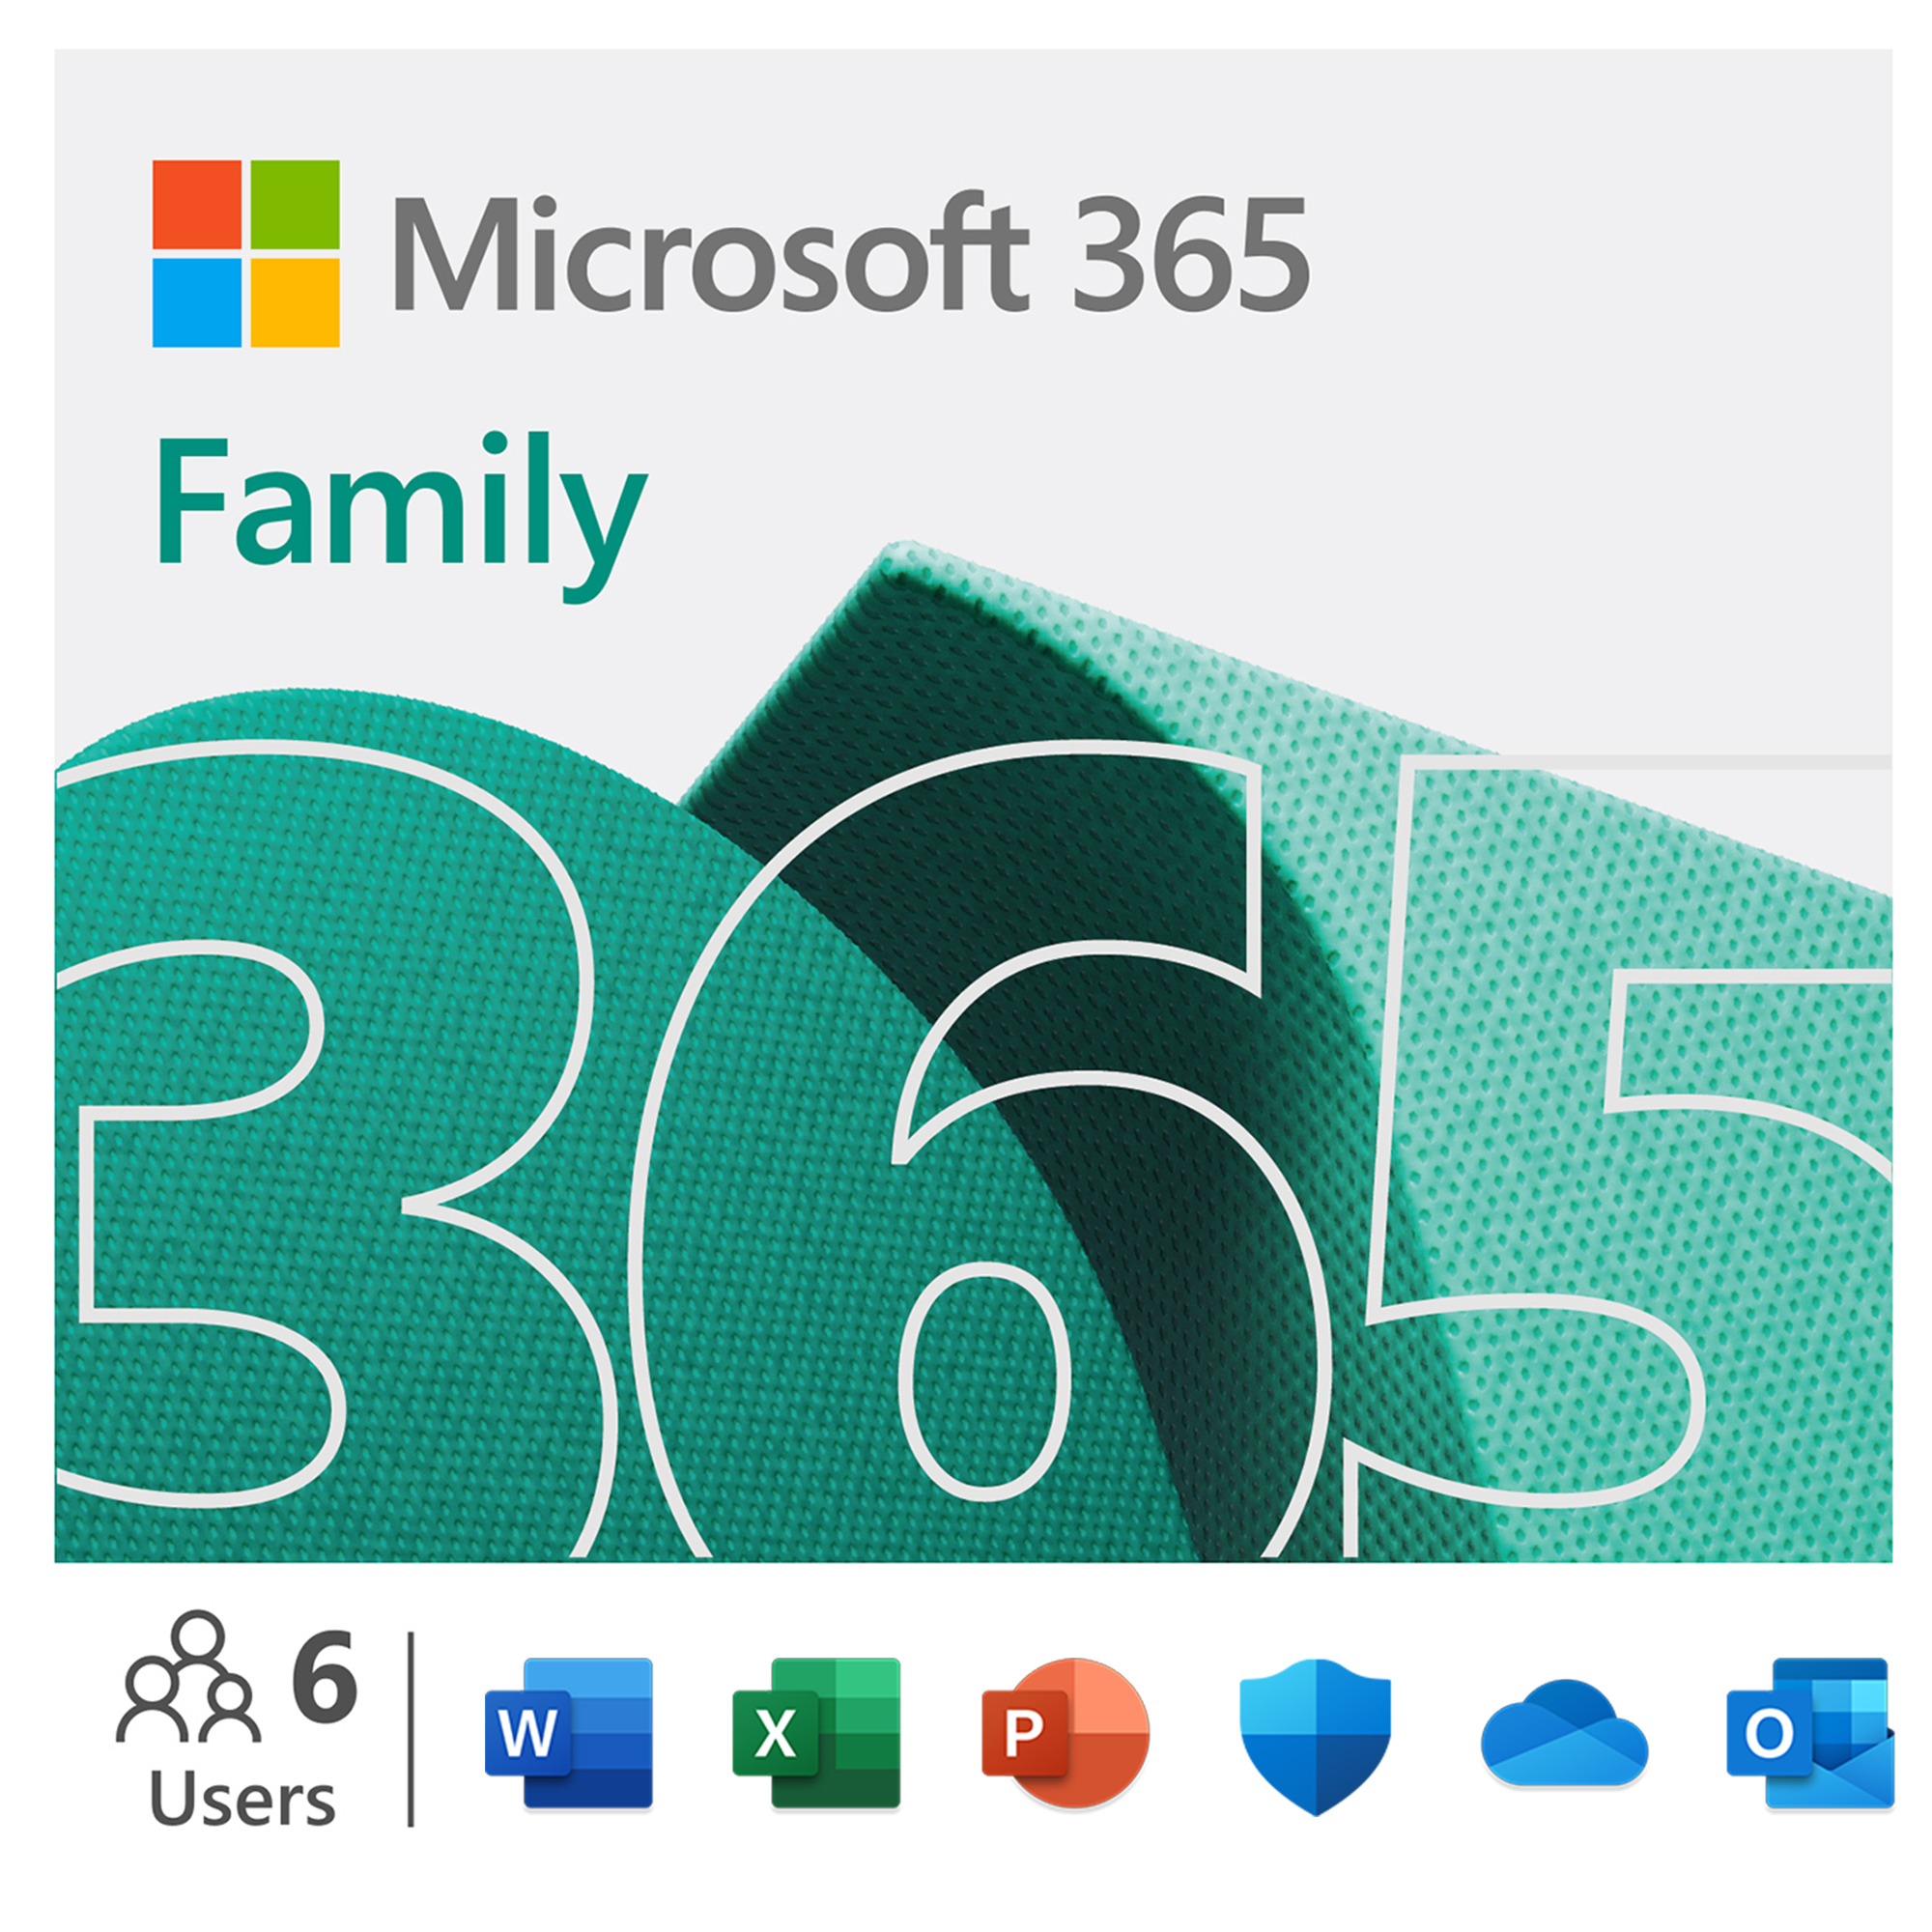 Microsoft 365 Family | 12-Month Subscription, up to 6 people | Premium Office apps | 1TB OneDrive cloud storage | PC/Mac Download - image 1 of 7